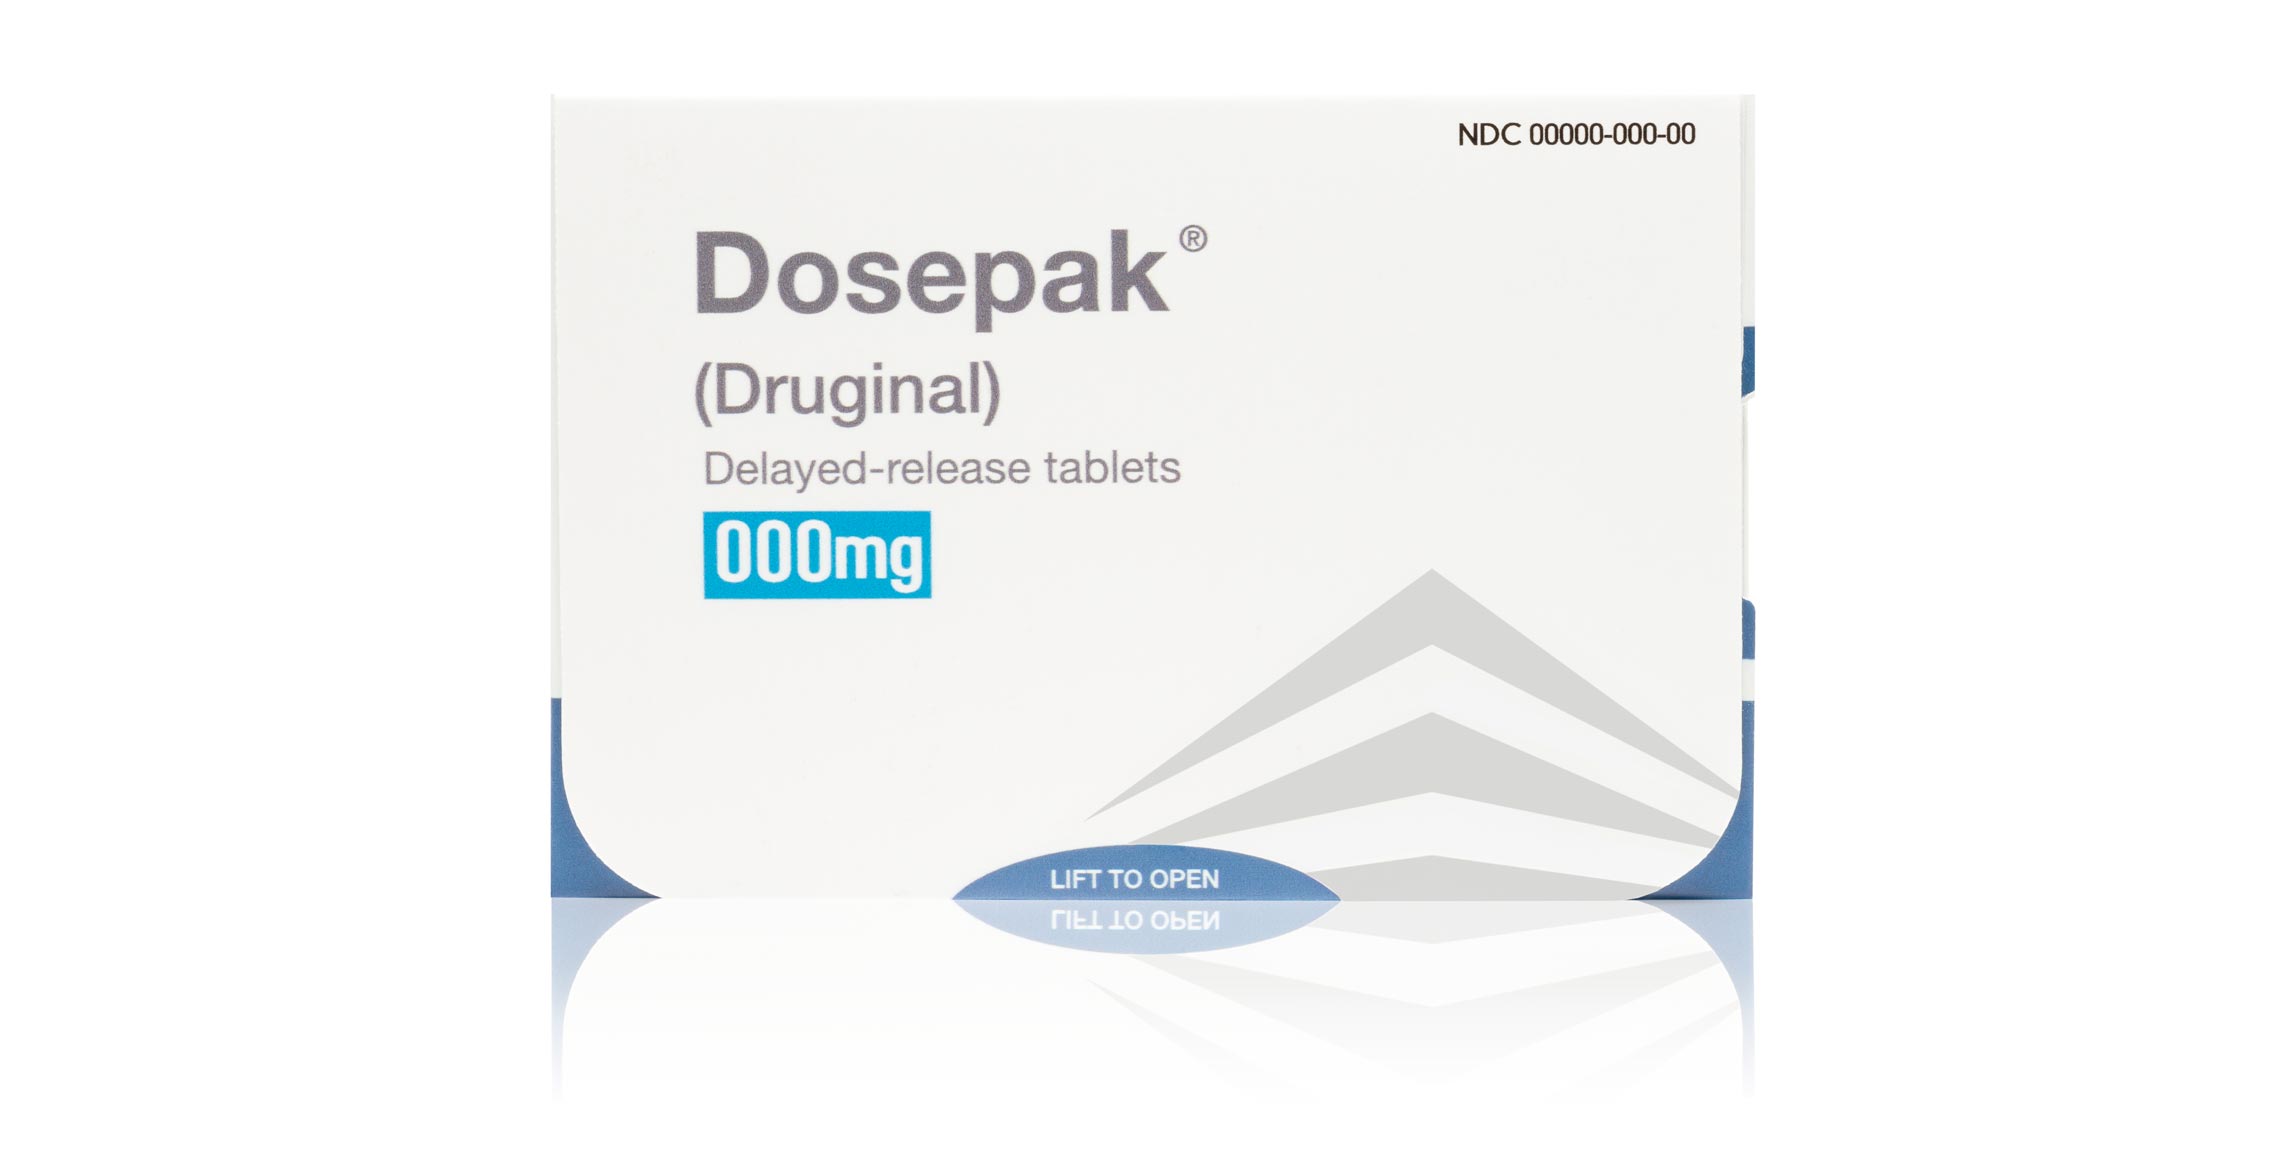 A front image of Dosepak.